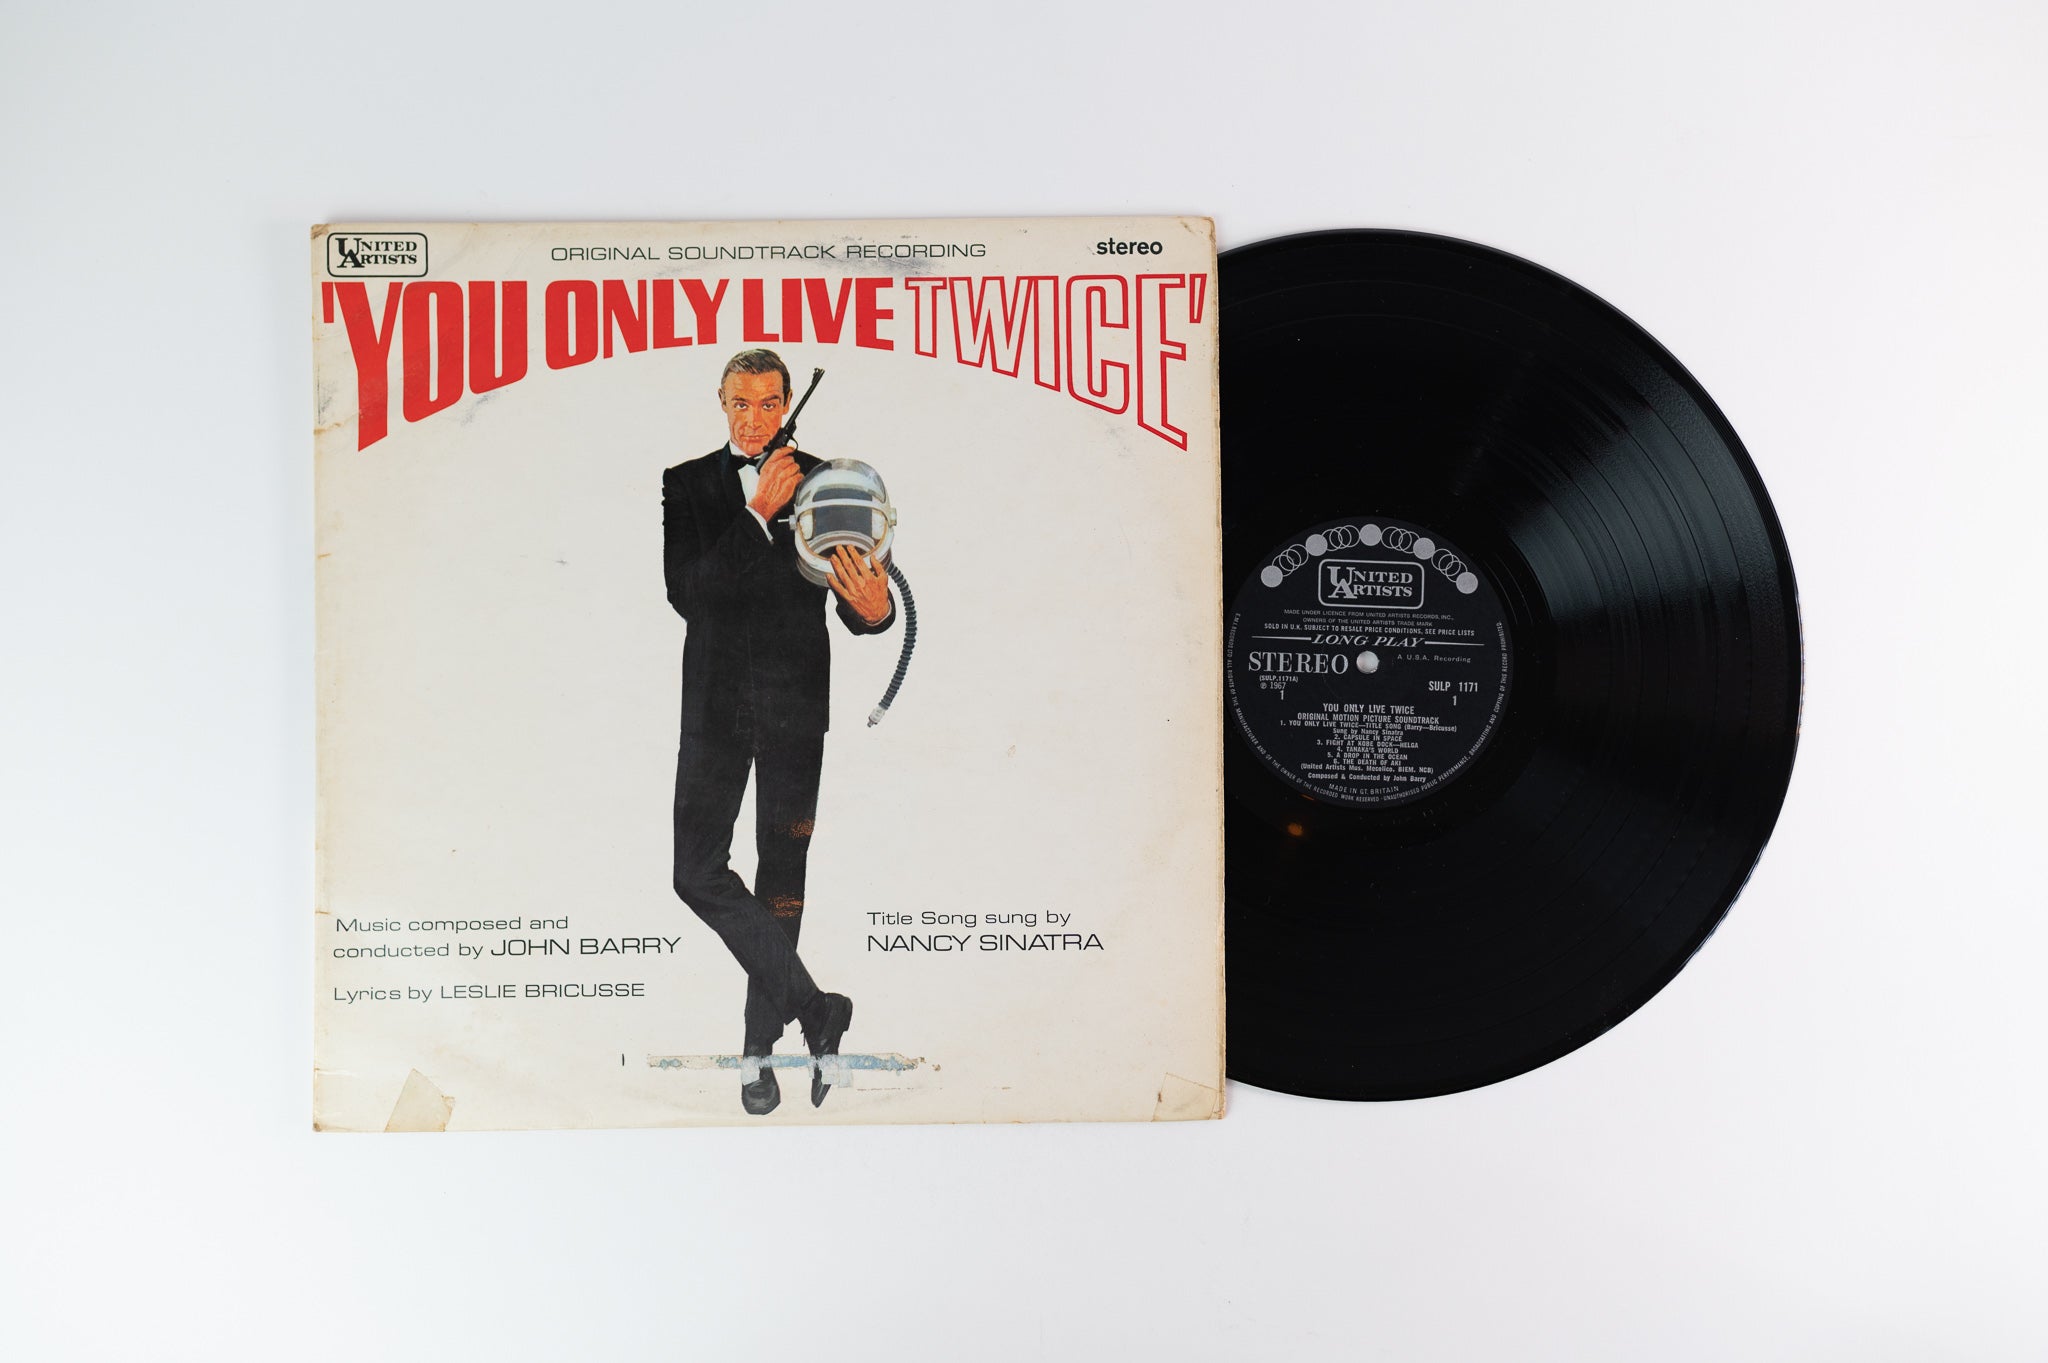 John Barry - You Only Live Twice (Original Motion Picture Soundtrack) on United Artists Records - UK Pressing